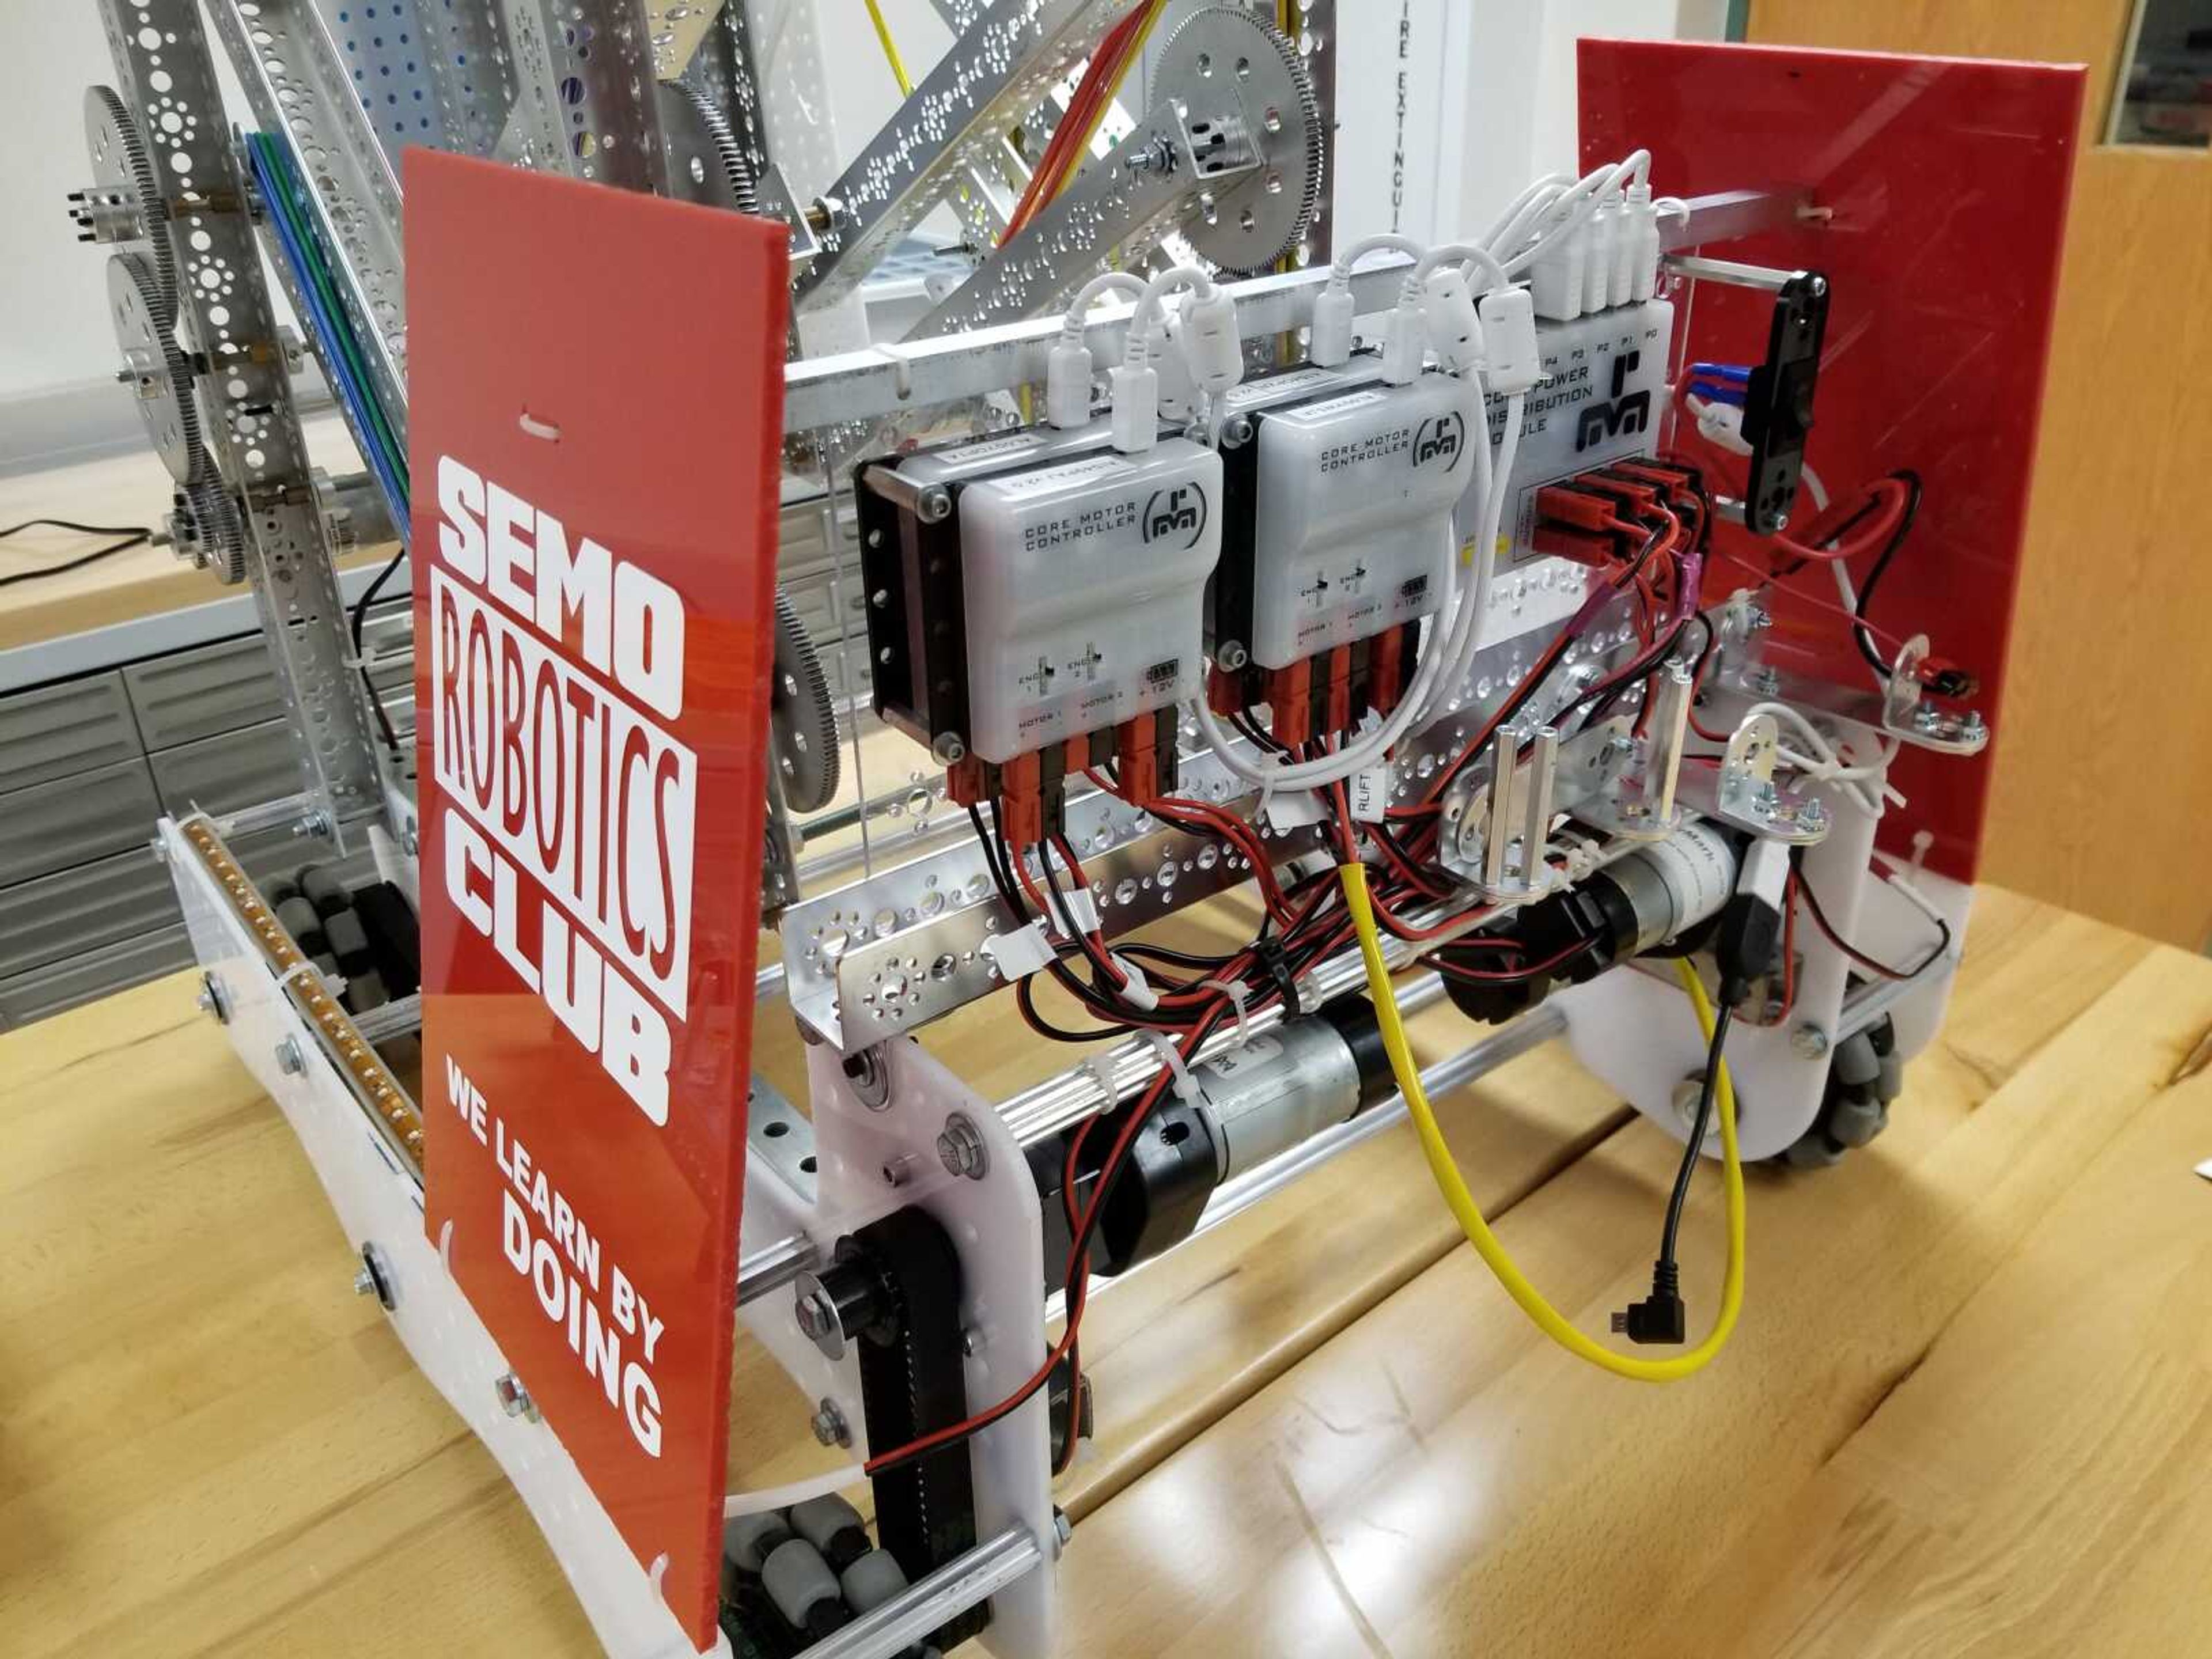 Close-ups of the Southeast Robotics club robot without the extended arms